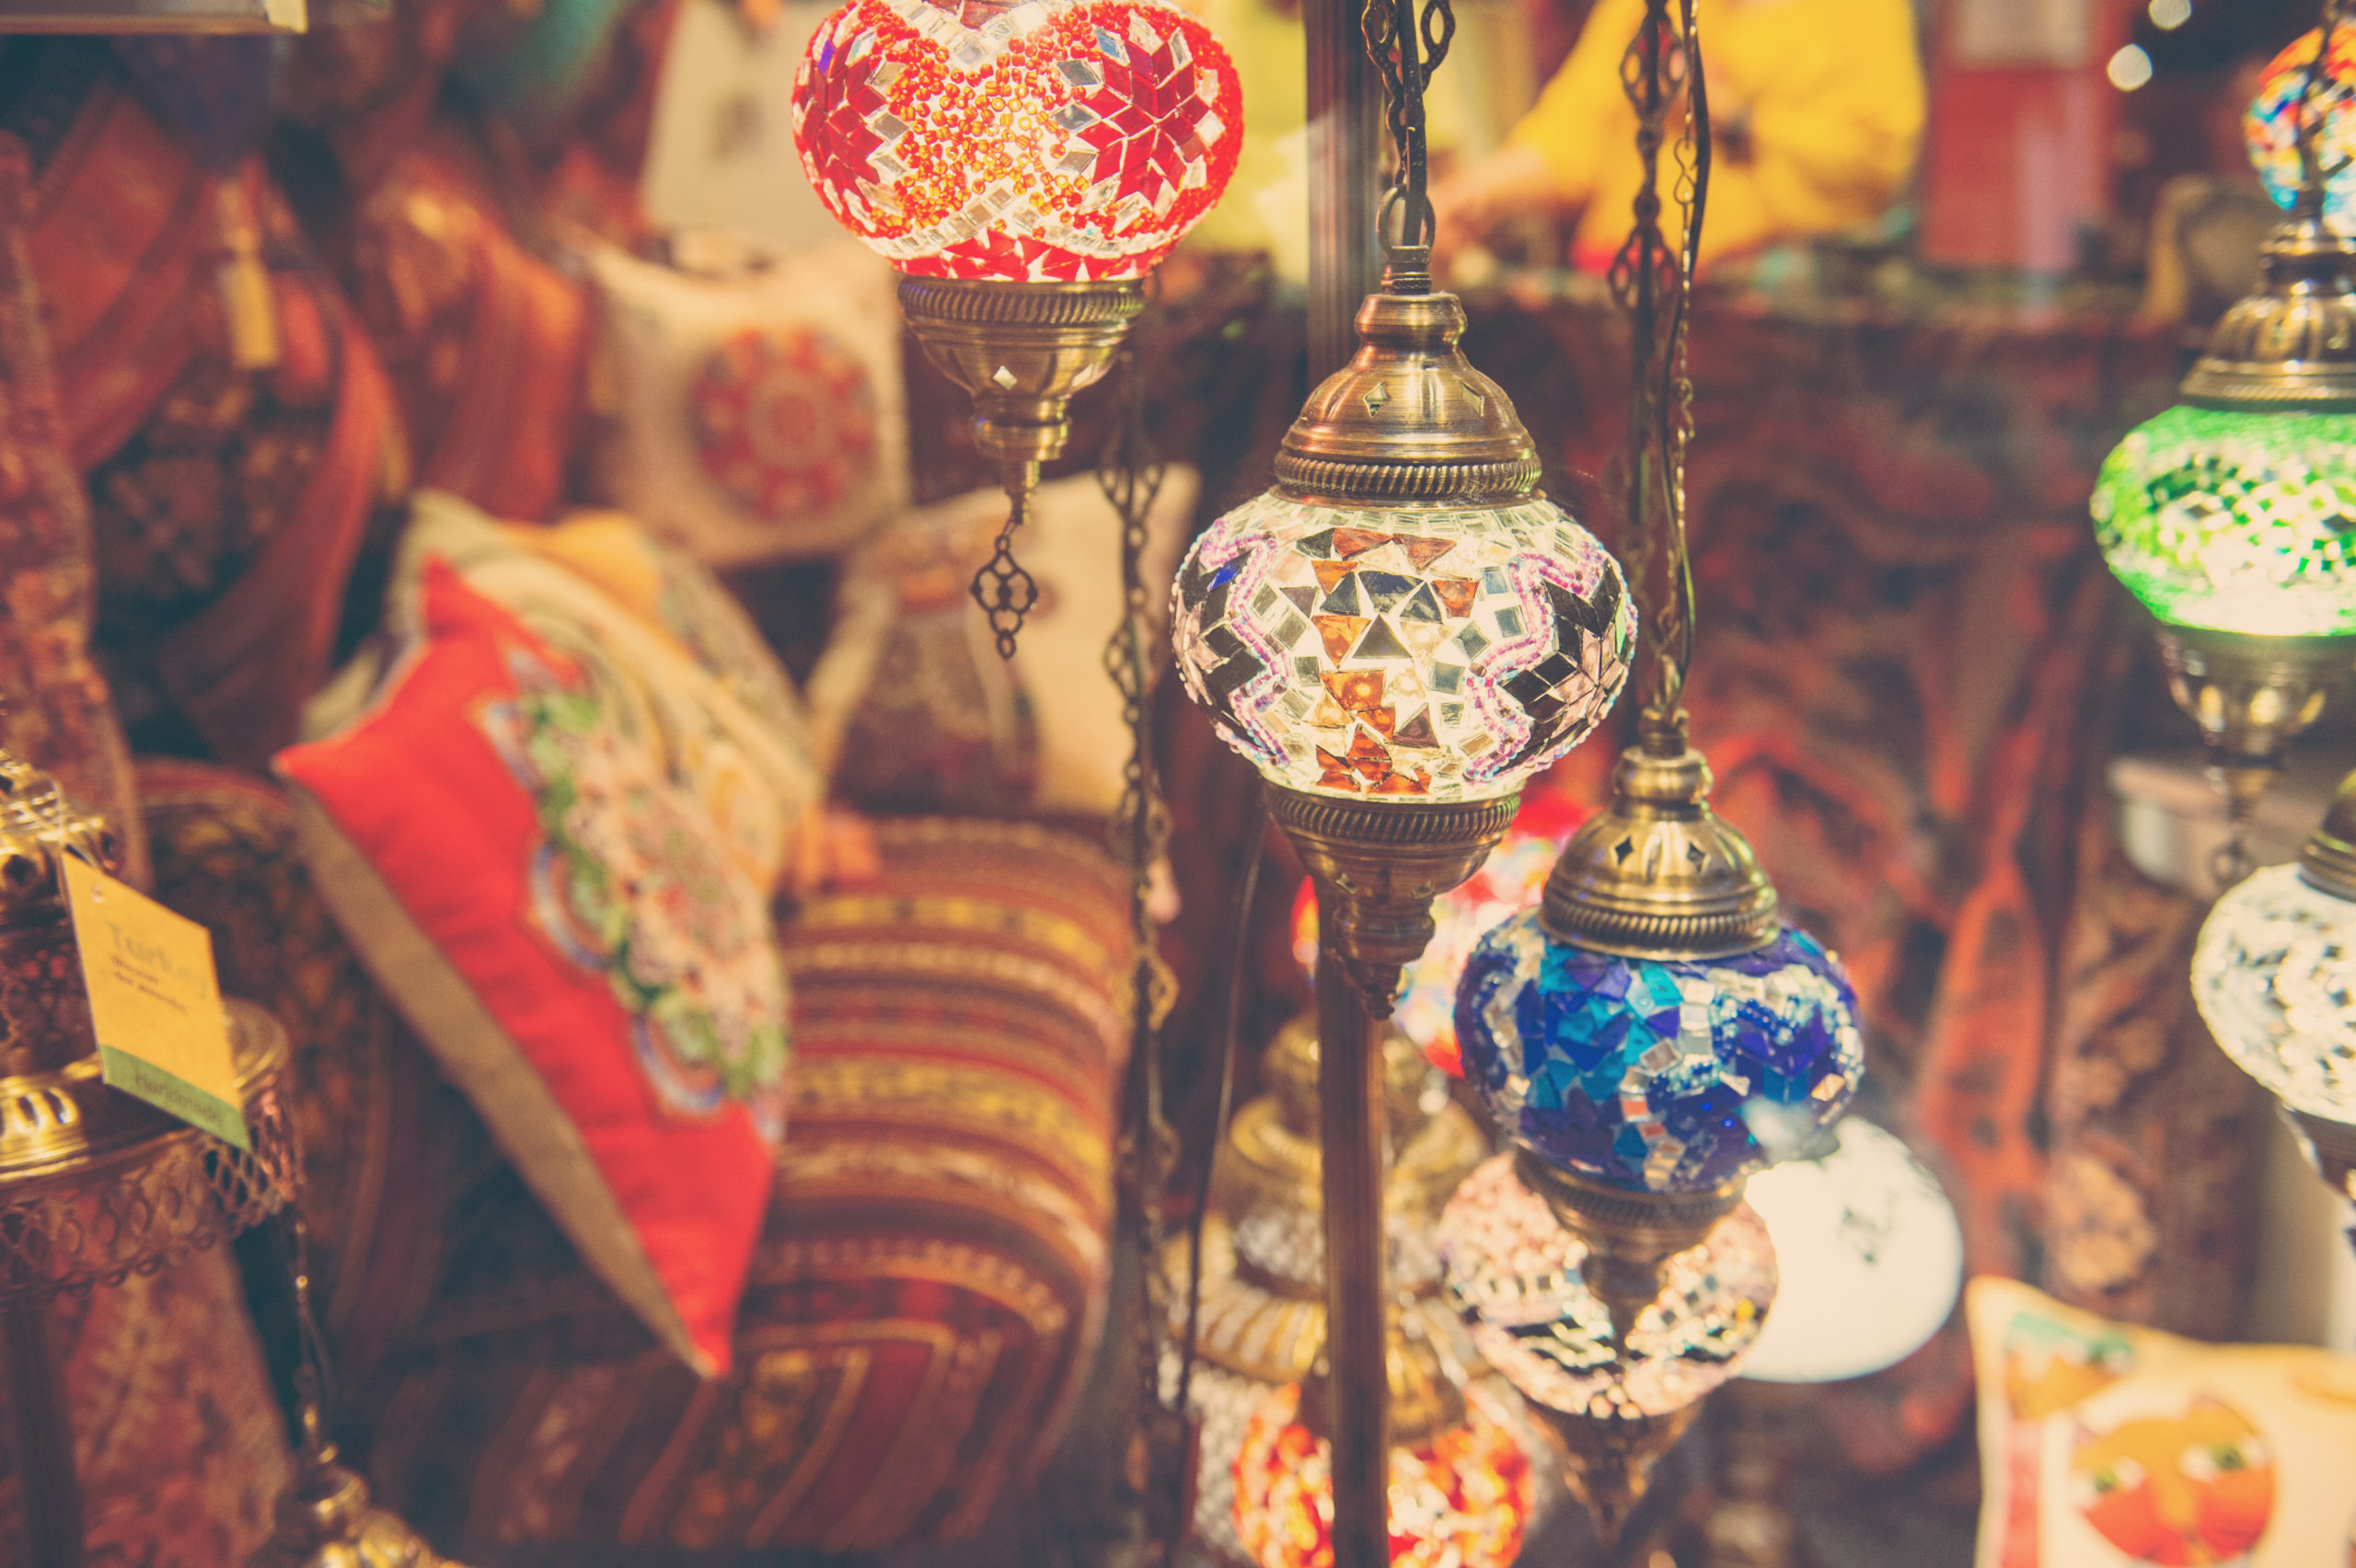 Here’s a quick guide on some of the important about Arab culture and traditions. You will definitely want to visit the Middle East after this.